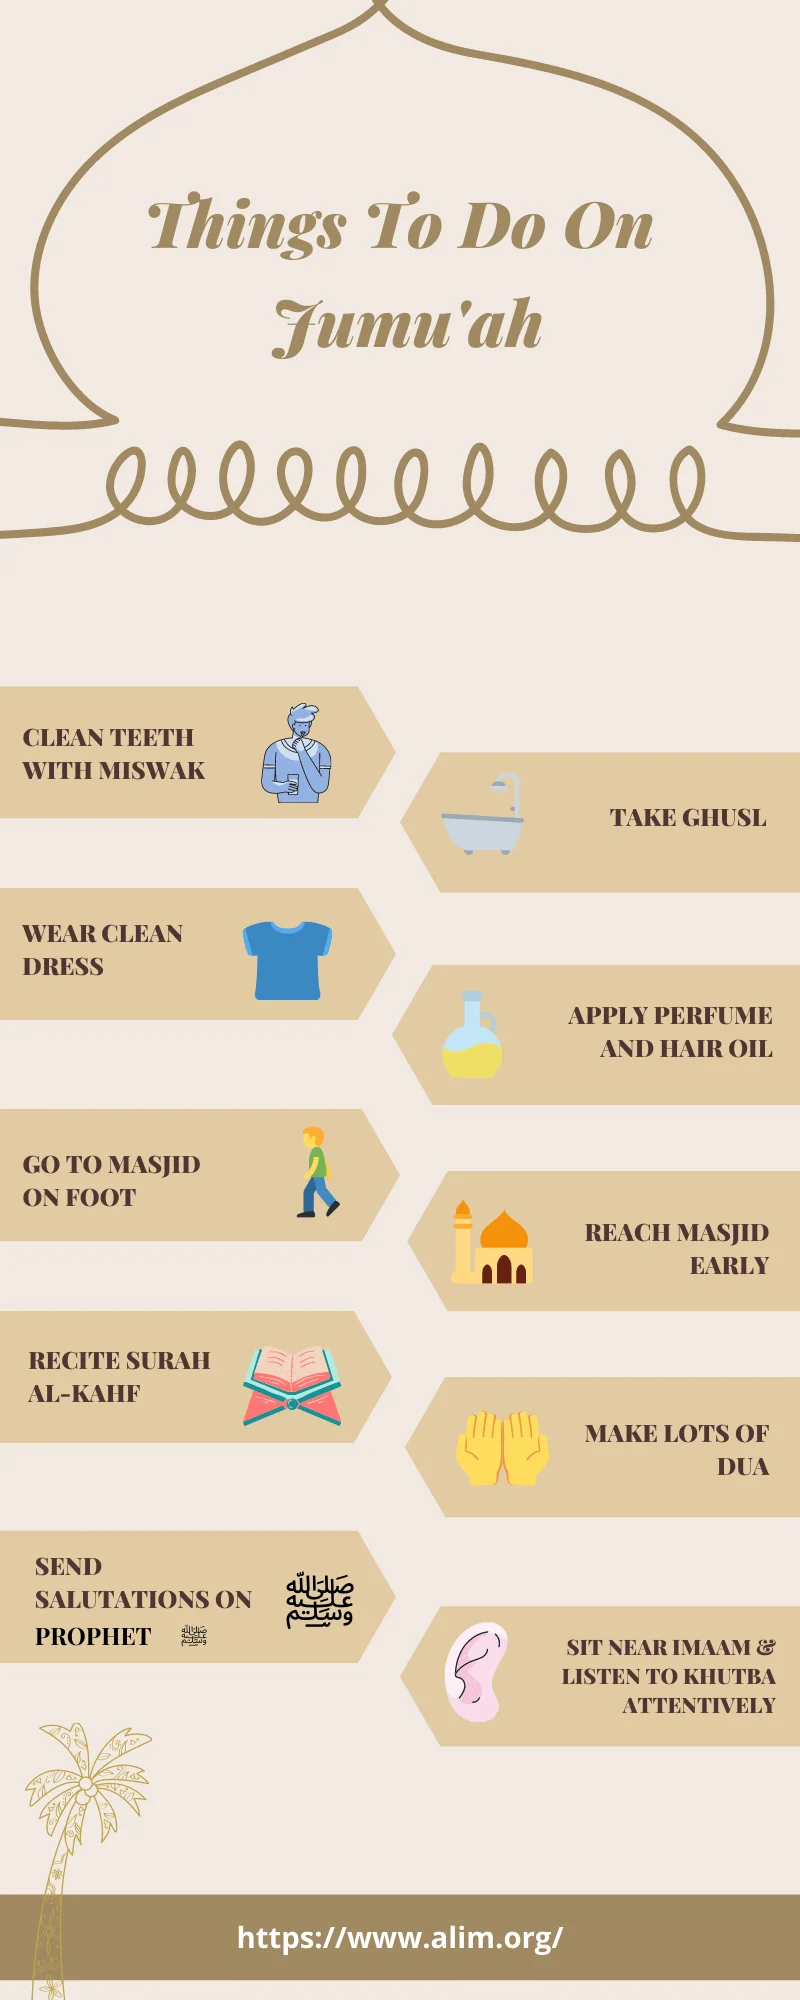 Things to do on Jumuah